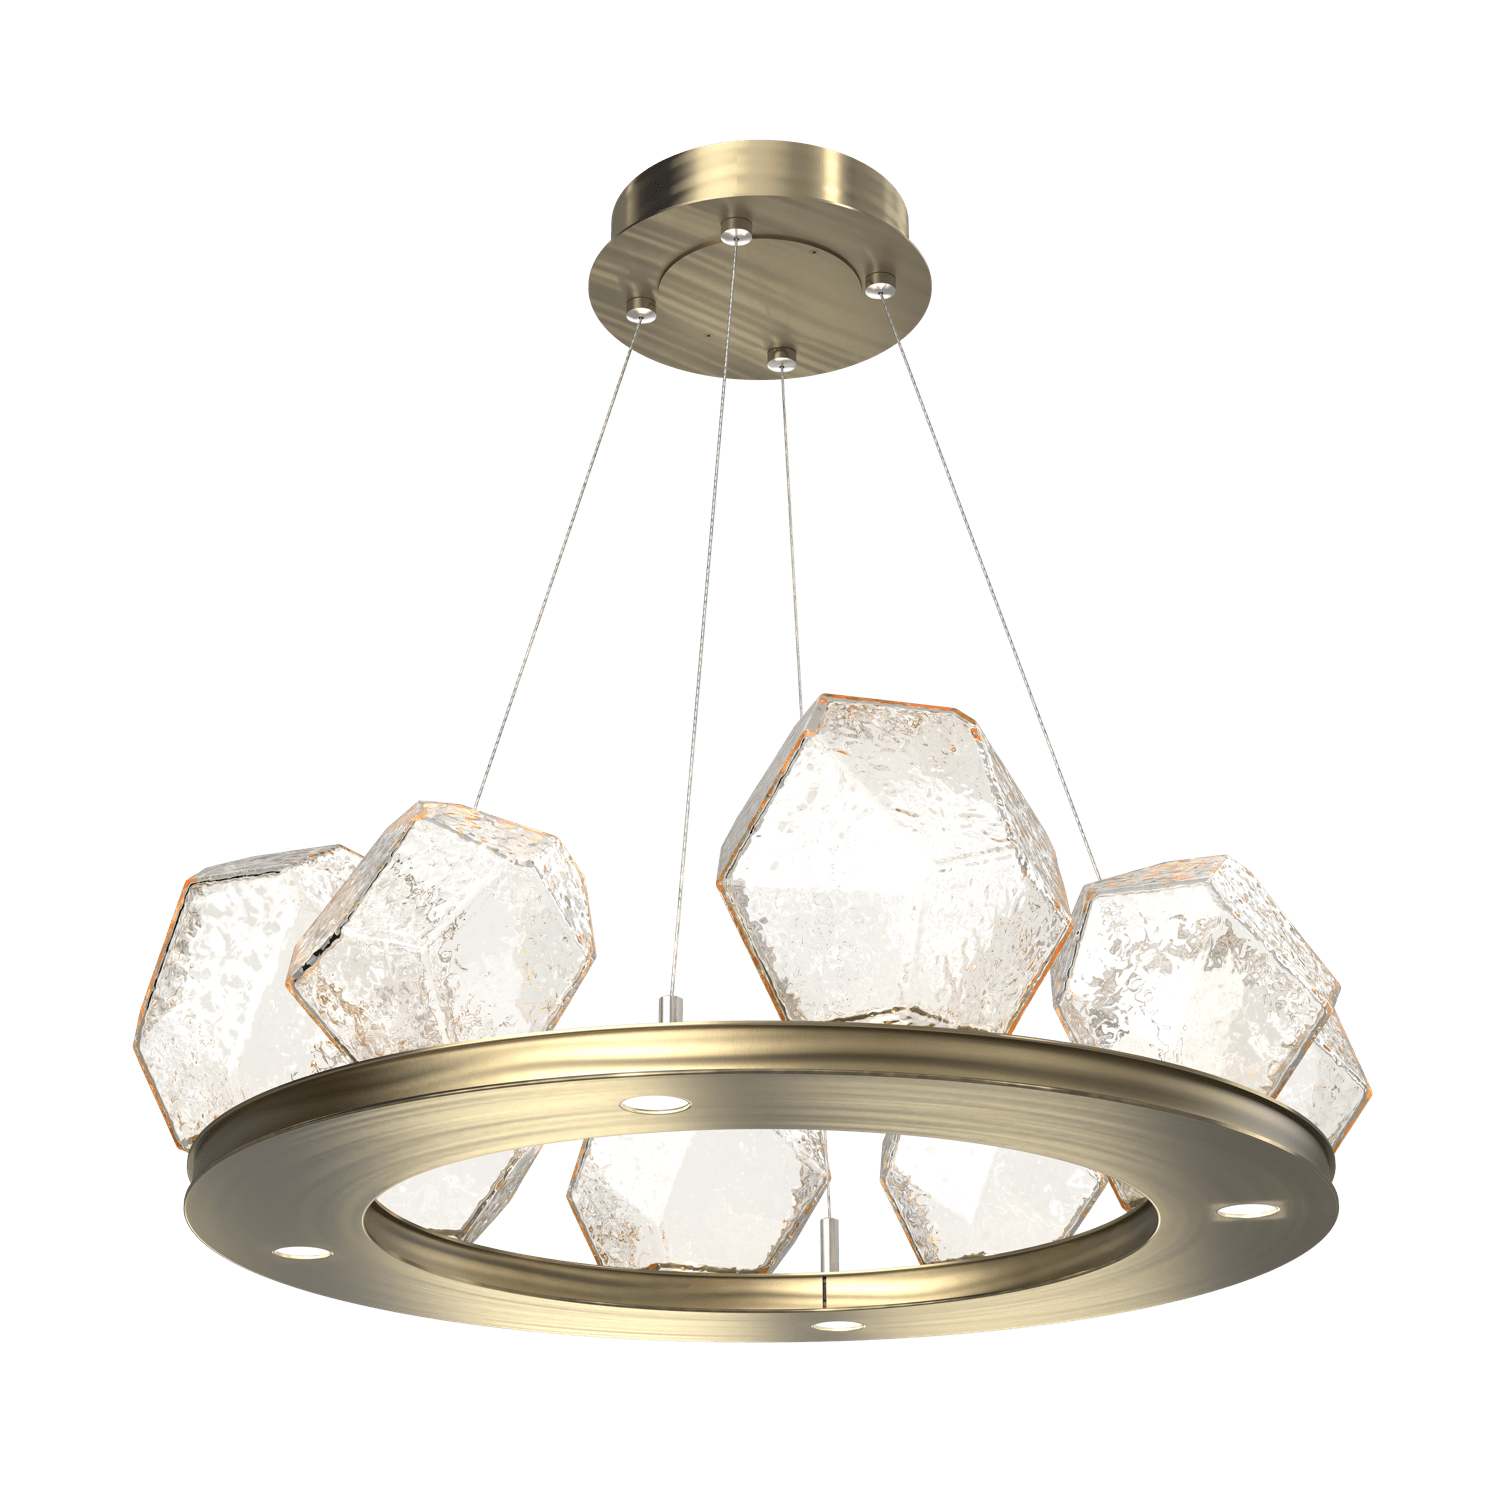 CHB0039-0B-HB-A-Hammerton-Studio-Gem-27-inch-ring-chandelier-with-heritage-brass-finish-and-amber-blown-glass-shades-and-LED-lamping